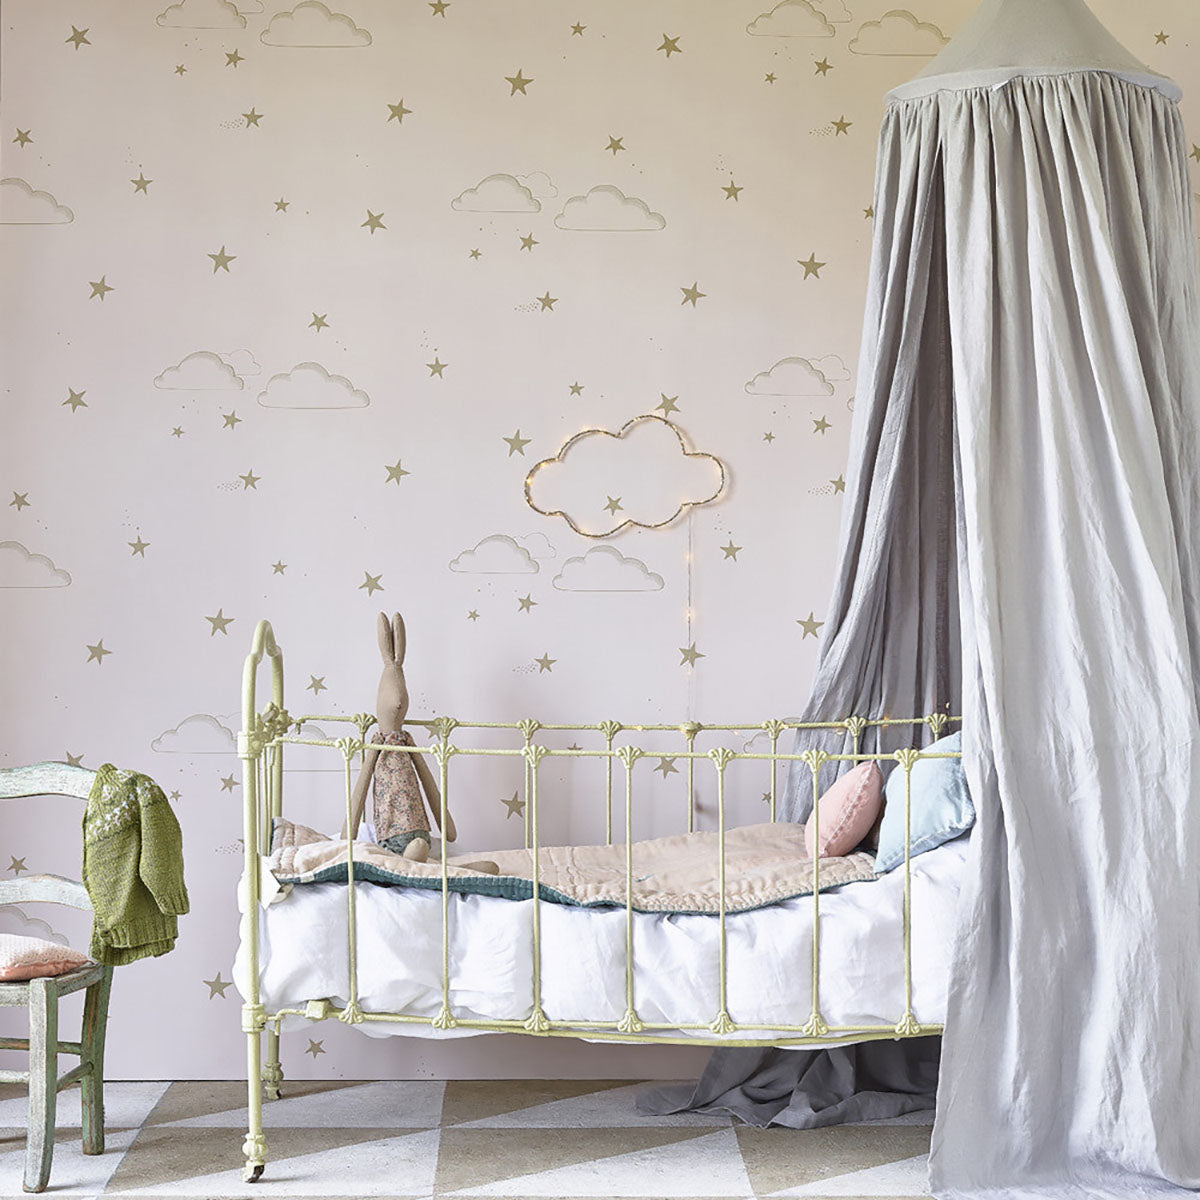 Hibou Home Starry Sky Wallpaper - Pale Rose/Gold